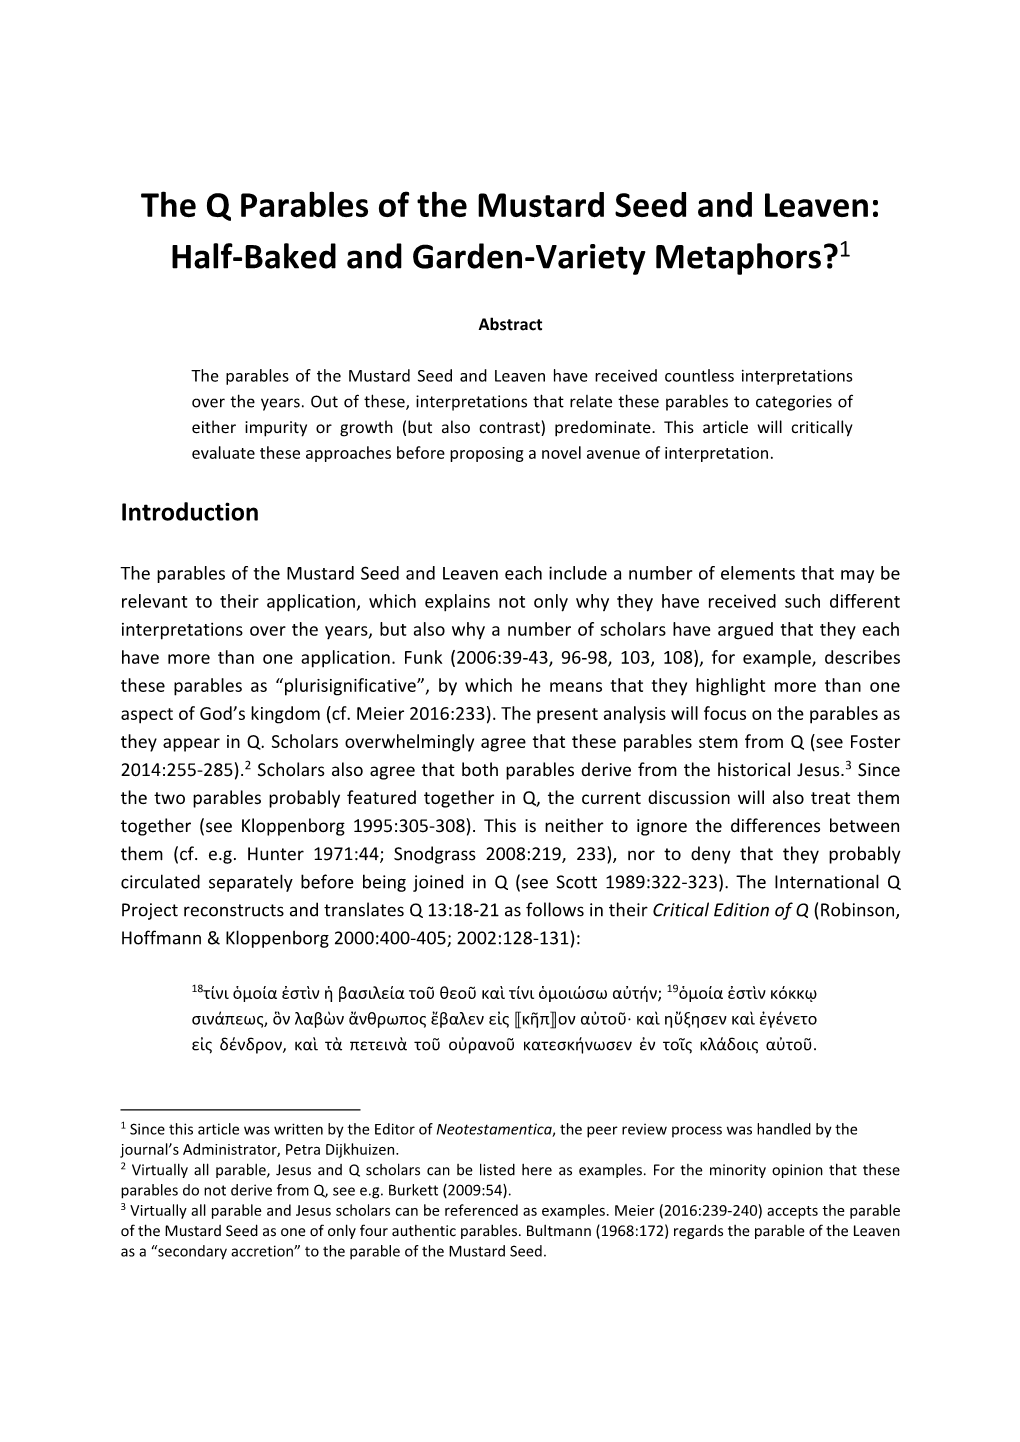 The Q Parables of the Mustard Seed and Leaven: Half‐Baked and Garden‐Variety Metaphors?1